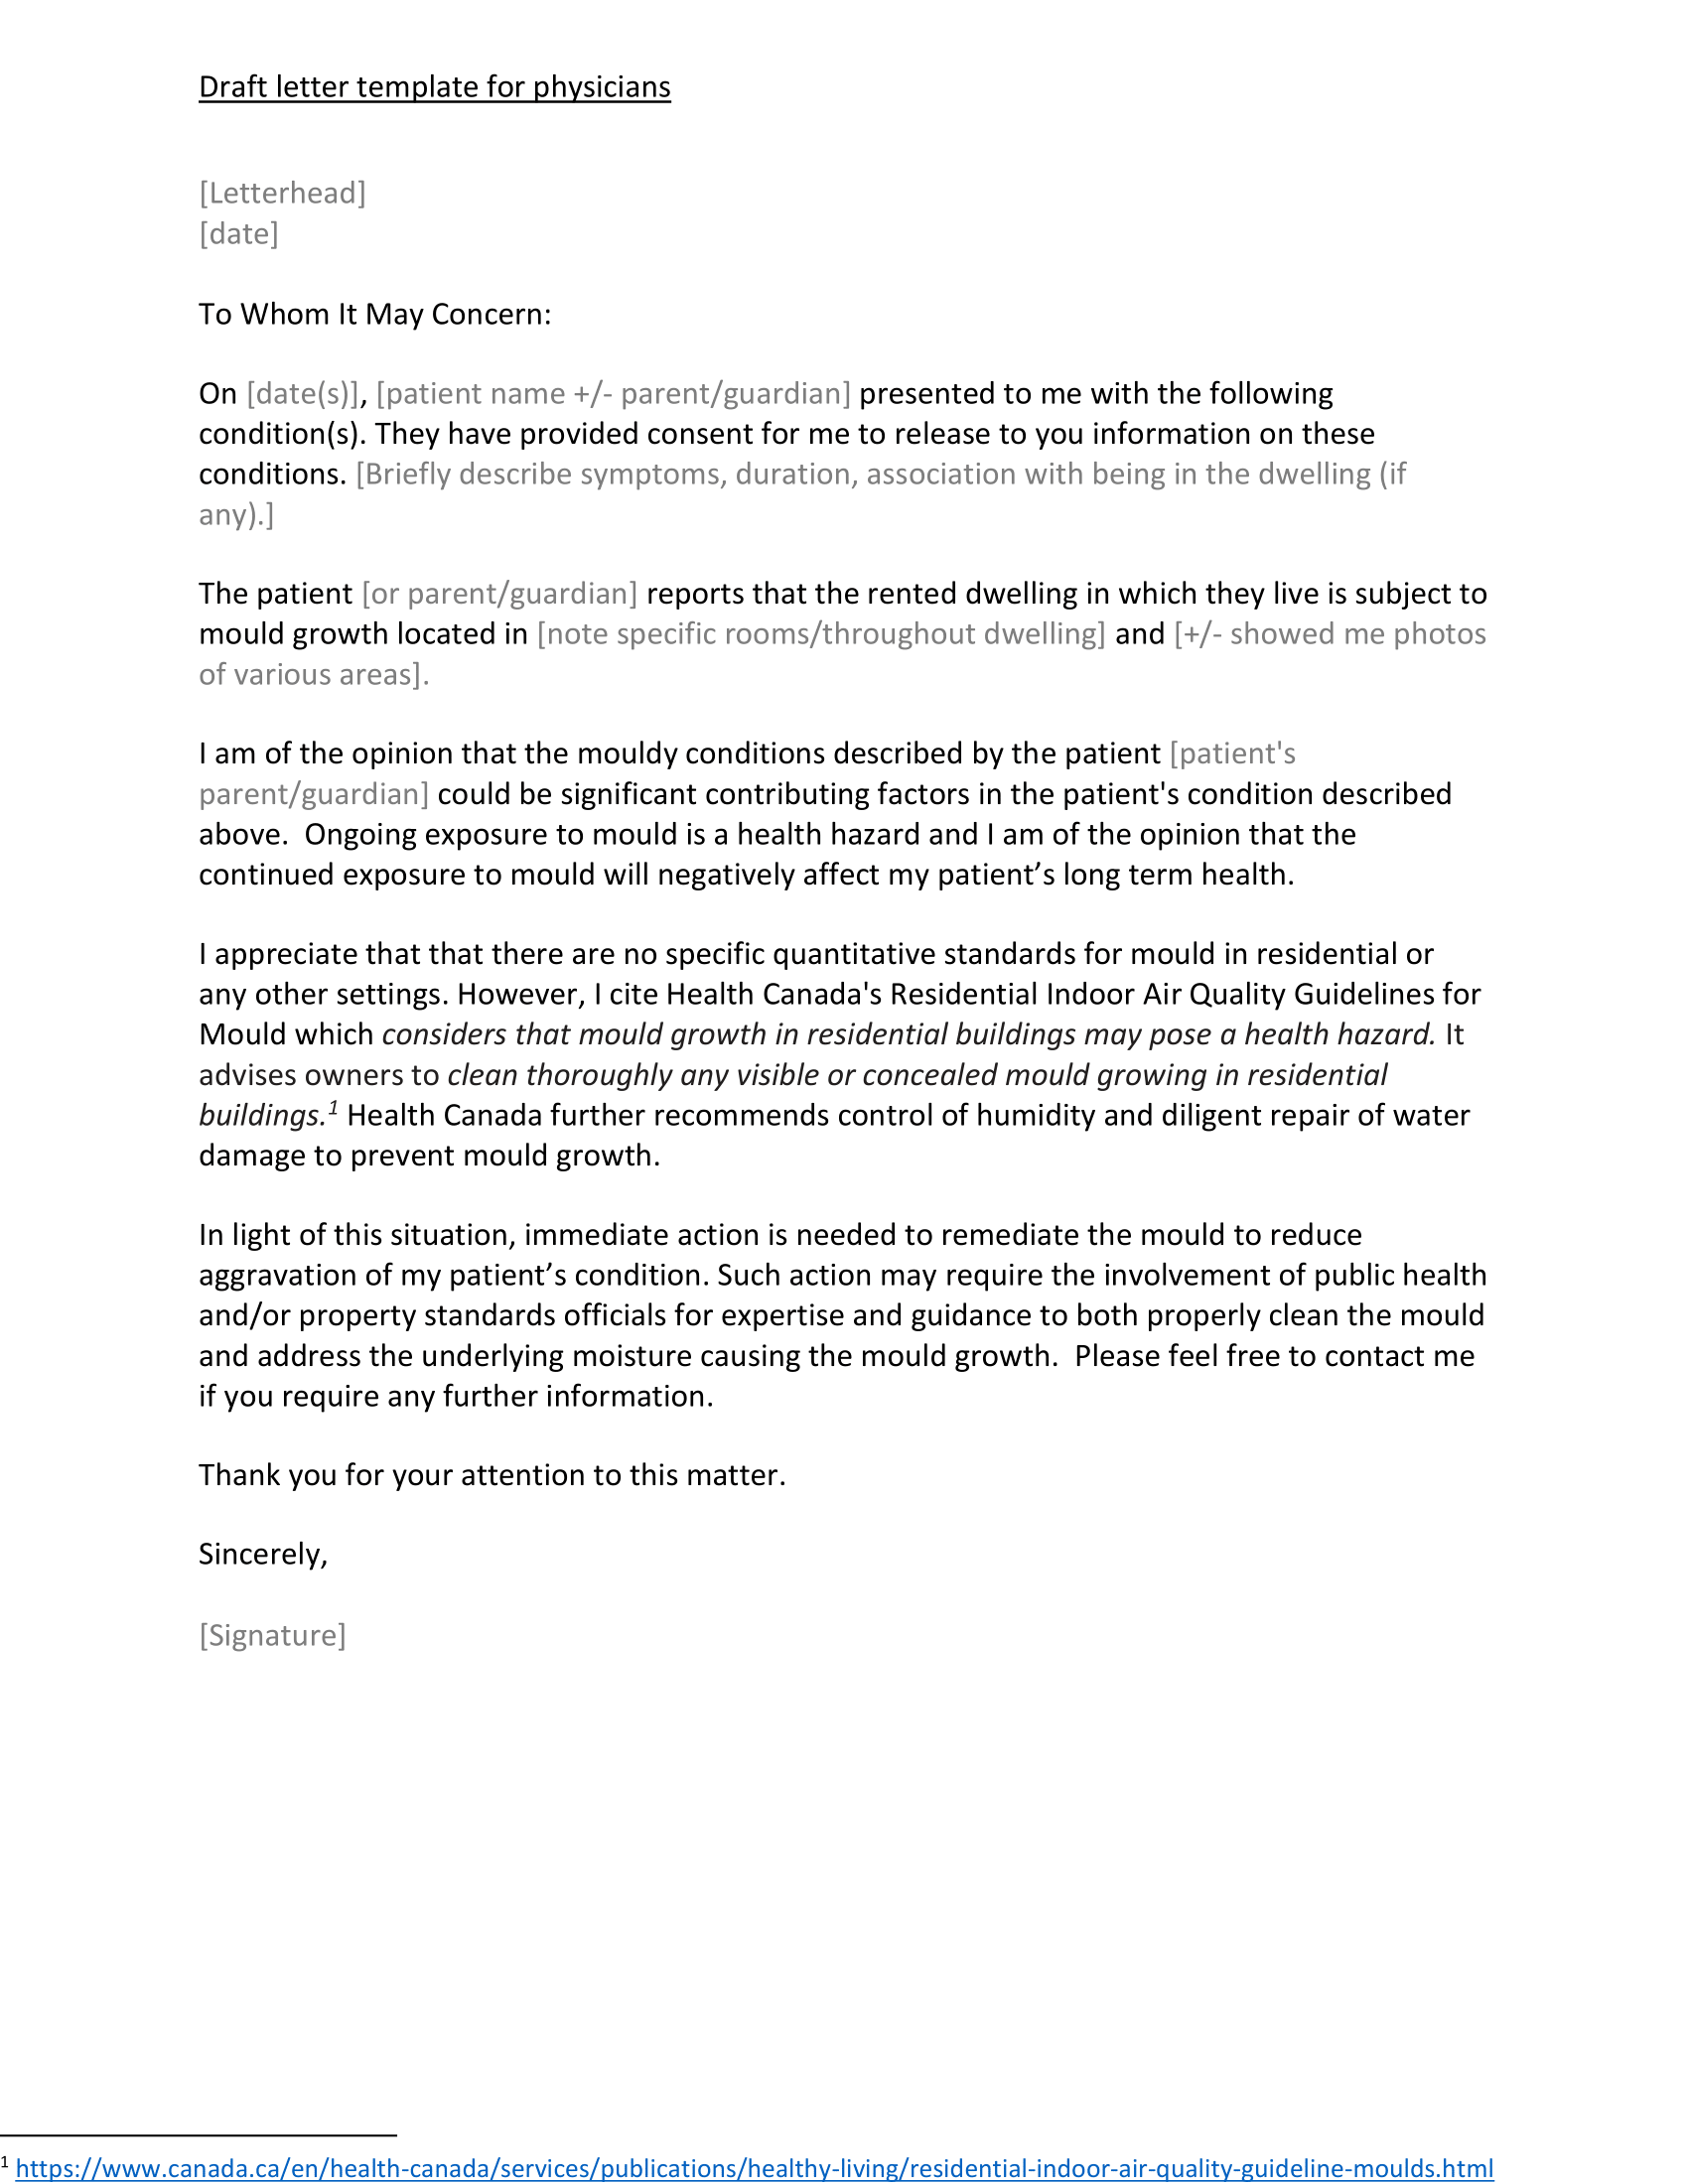 sample letter to inform patients relocation